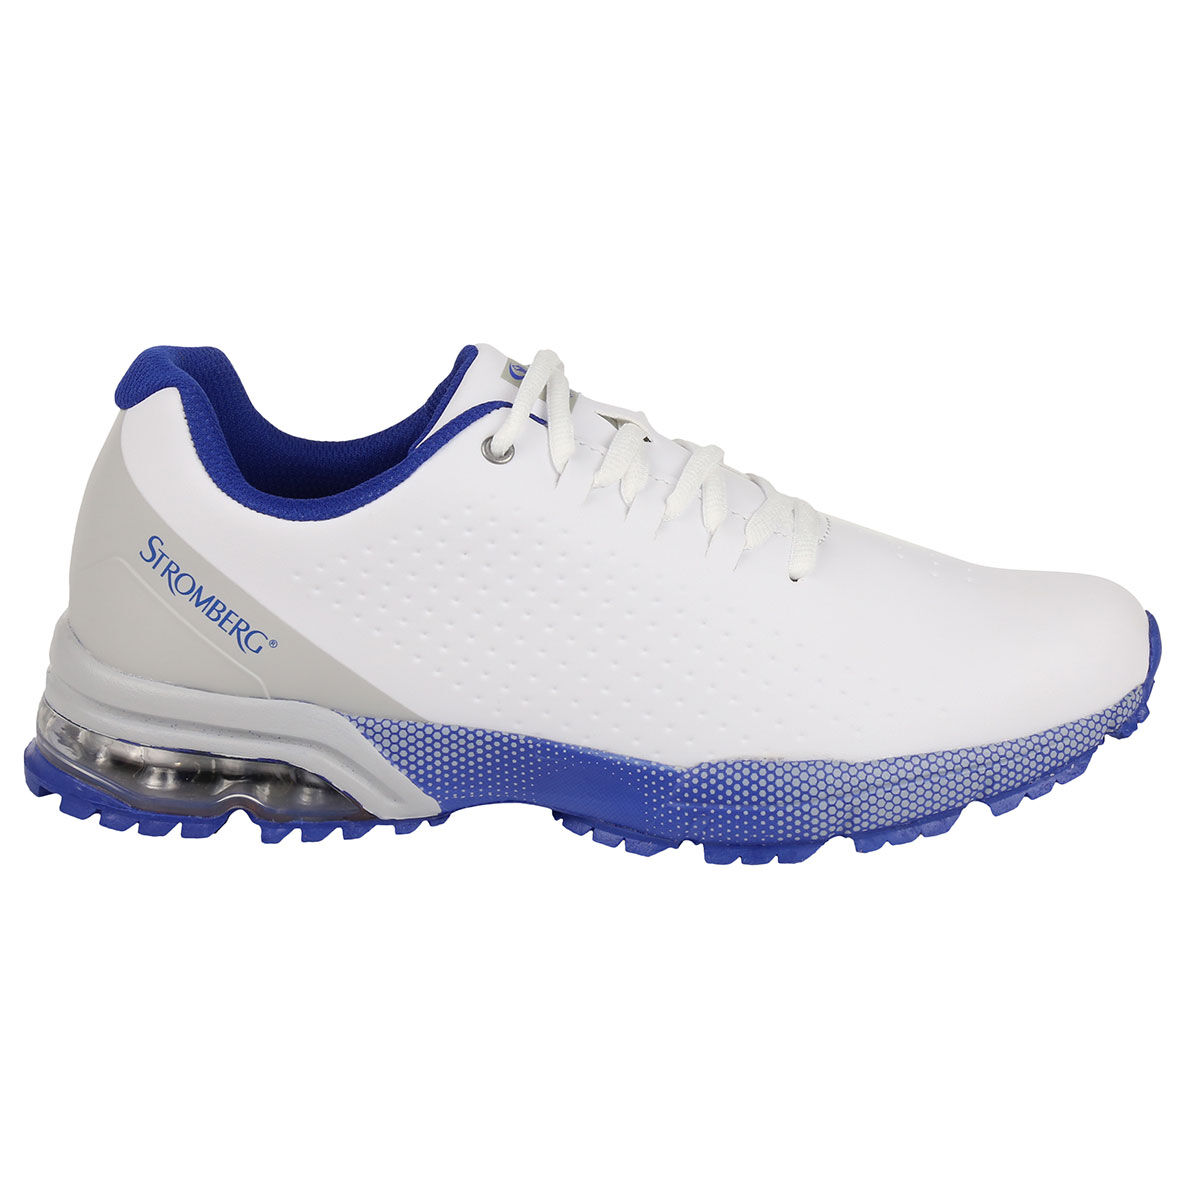 Stromberg White and Blue Waterproof Ailsa Spikeless Golf Shoes, Size: 7 | American Golf - Father's Day Gift von Stromberg